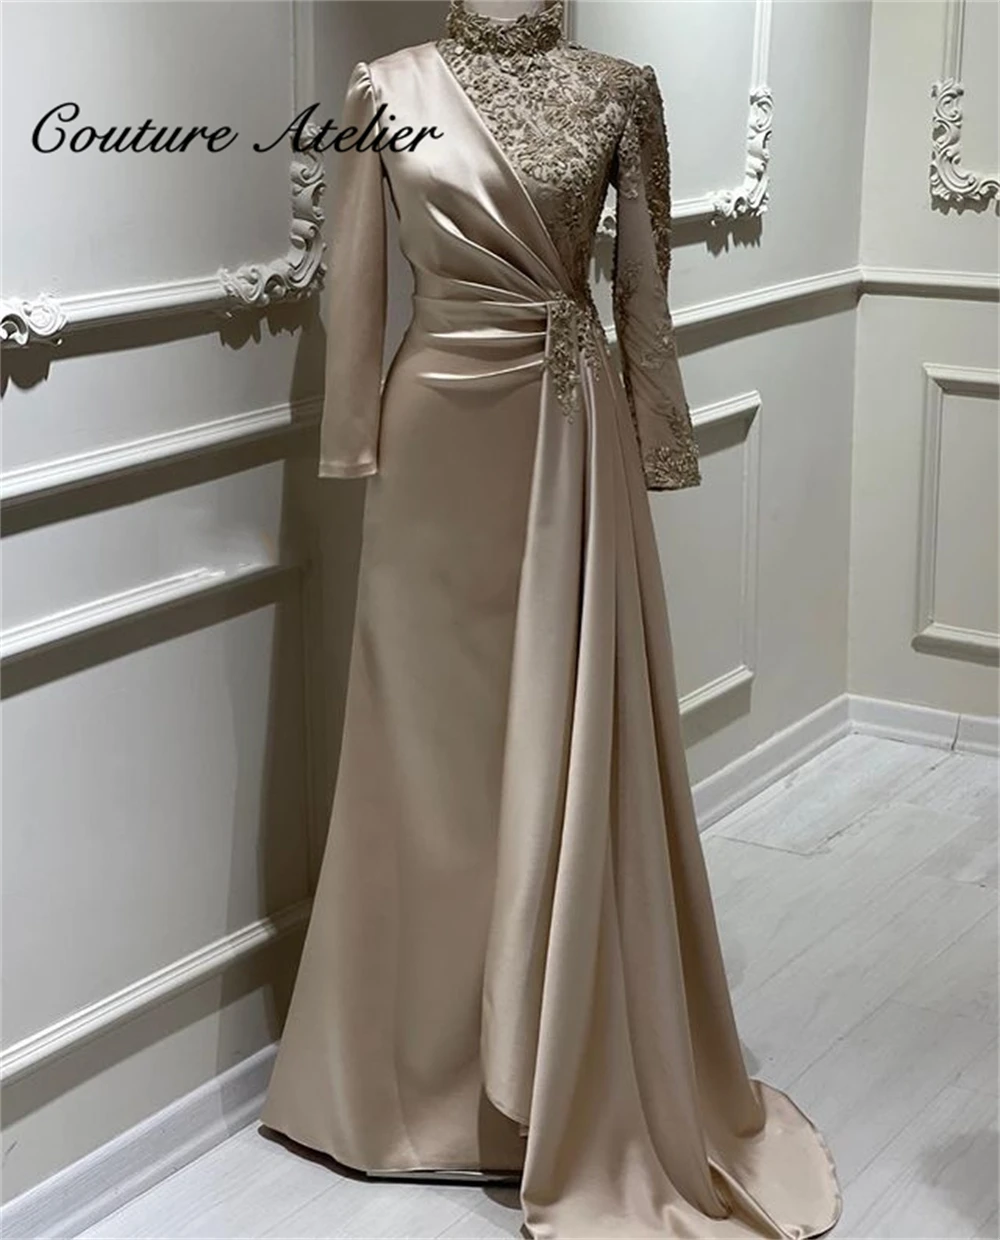 

Elegant Turkey Satin Muslim Evening Dresses Long Sleeve Luxury Party Dress 2022 Dinner Gowns High Neck A Line With Cape Beaded